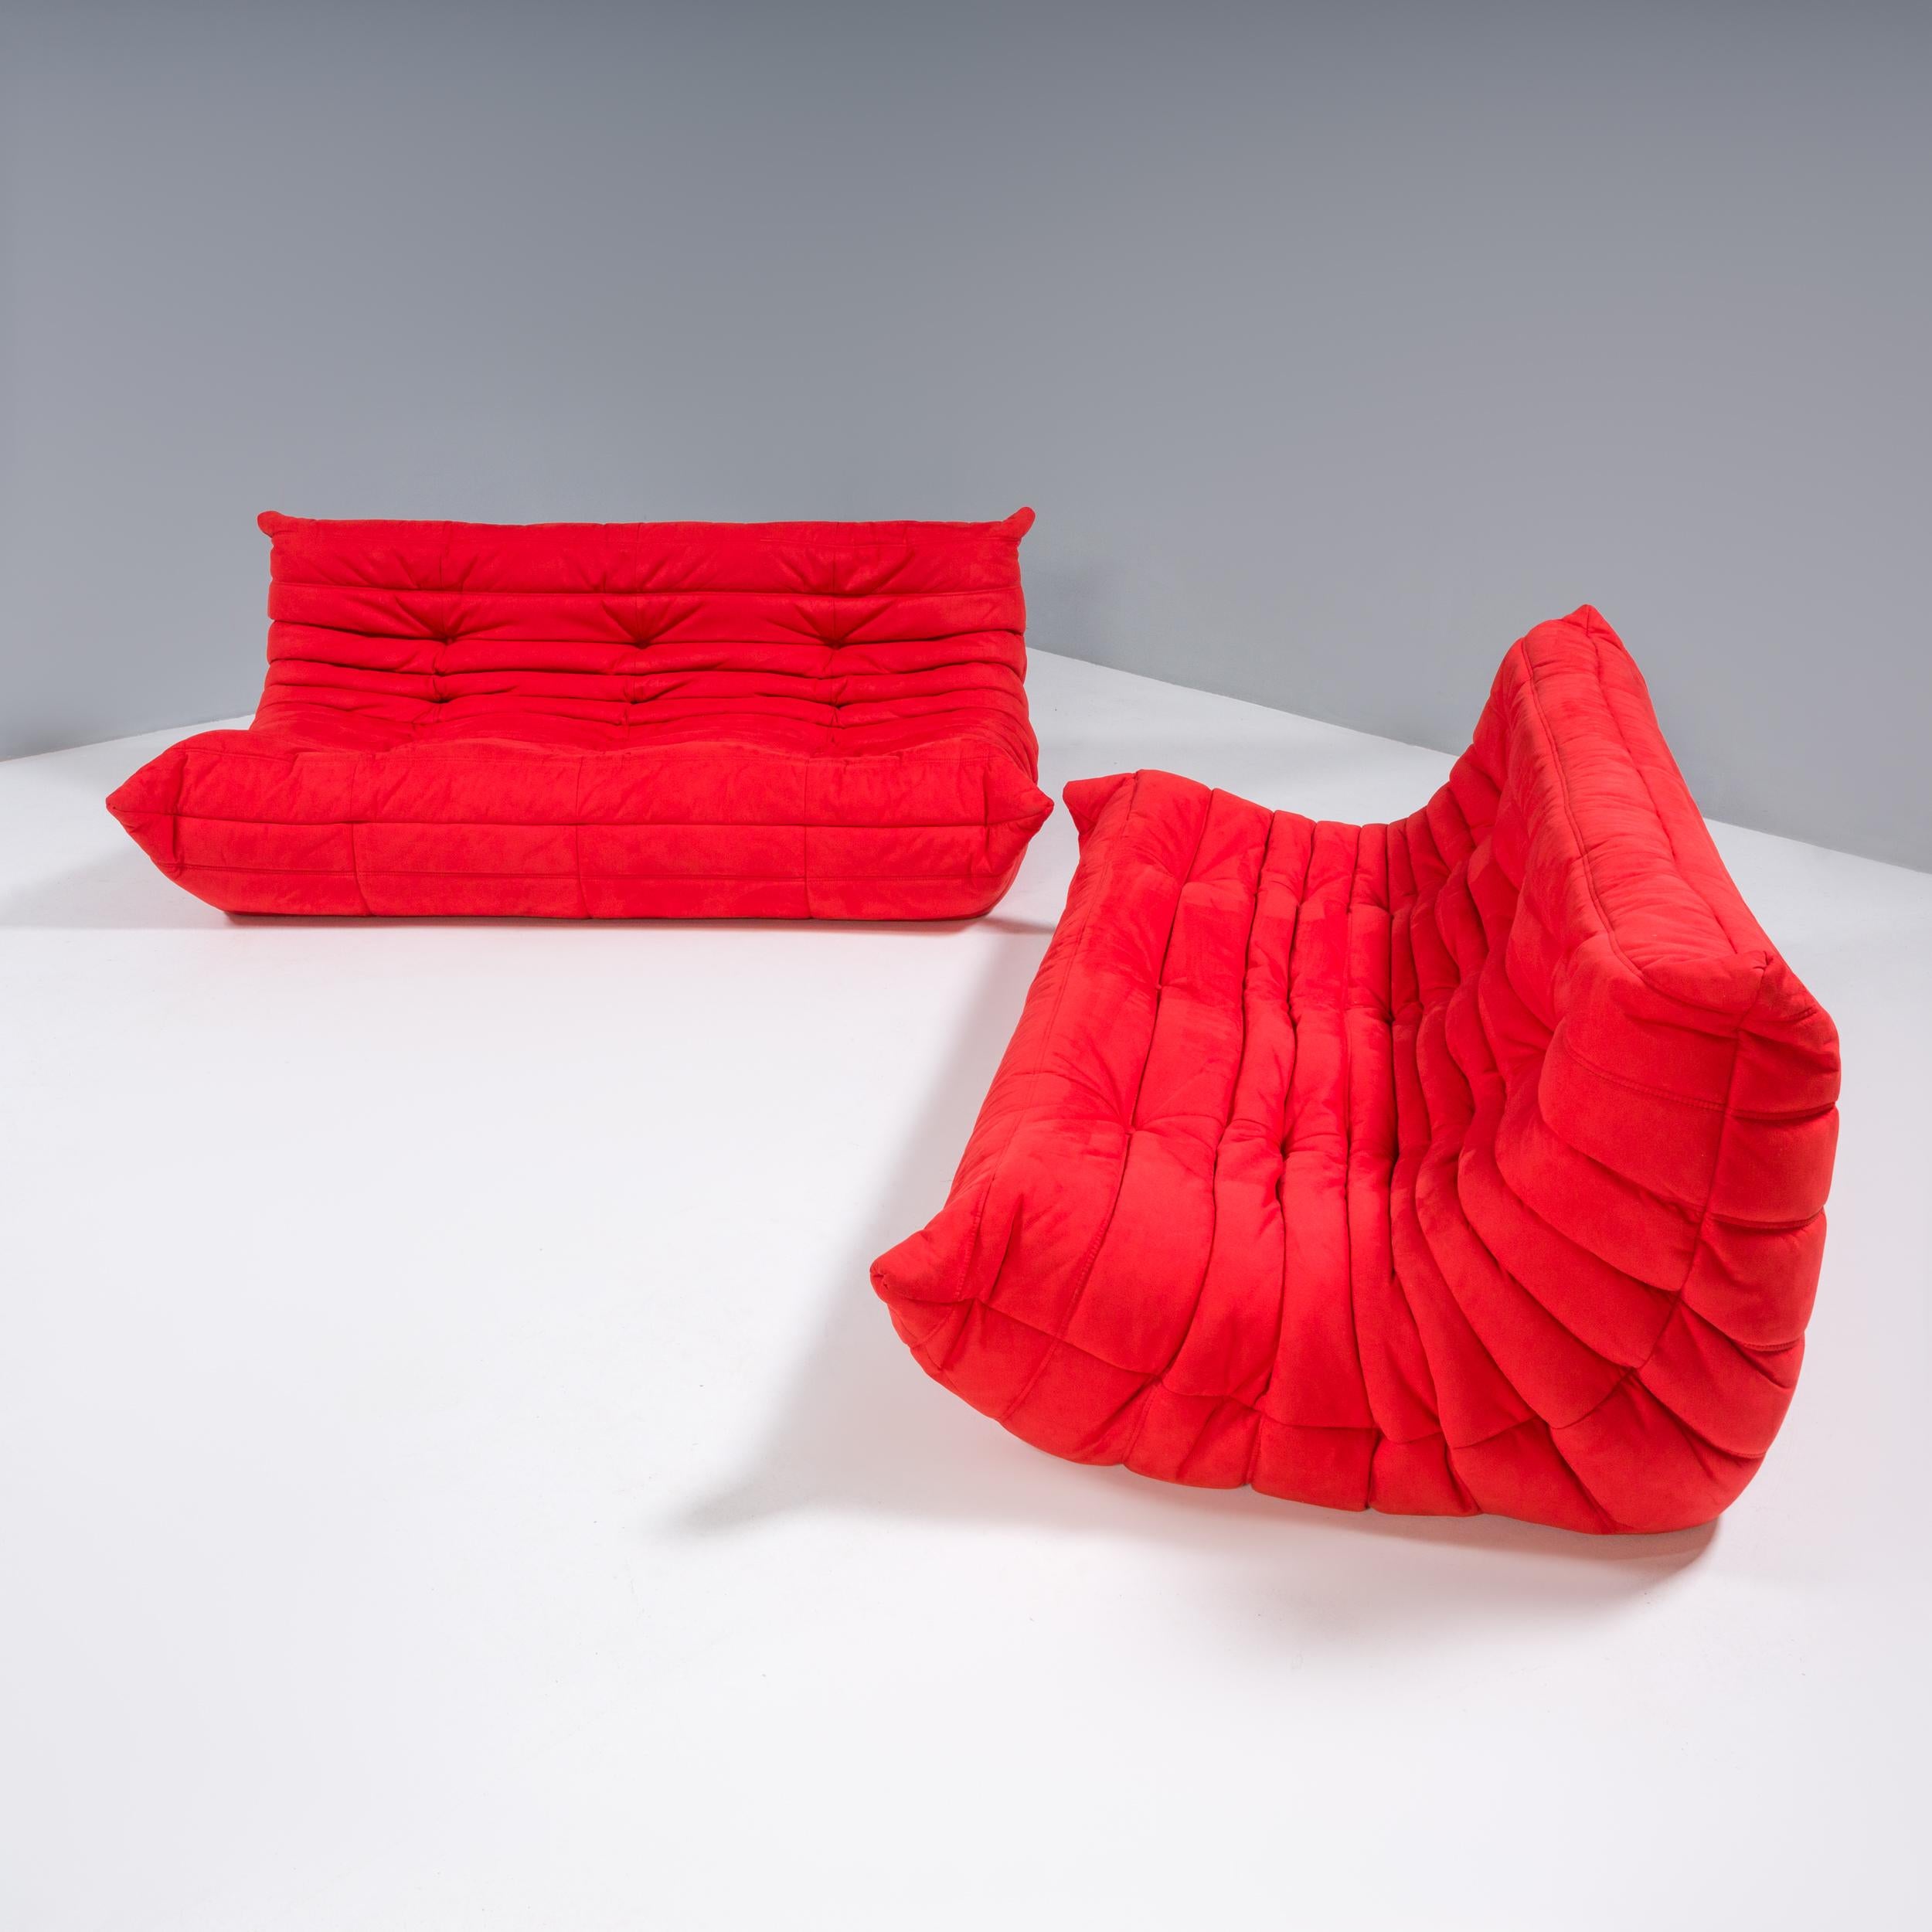 The iconic Togo sofa, originally designed by Michel Ducaroy for Ligne Roset in 1973 has become a design Classic.

This two-piece set can be configured into one large sofa or used as two separate ones.

Comprising two large sofas, the set